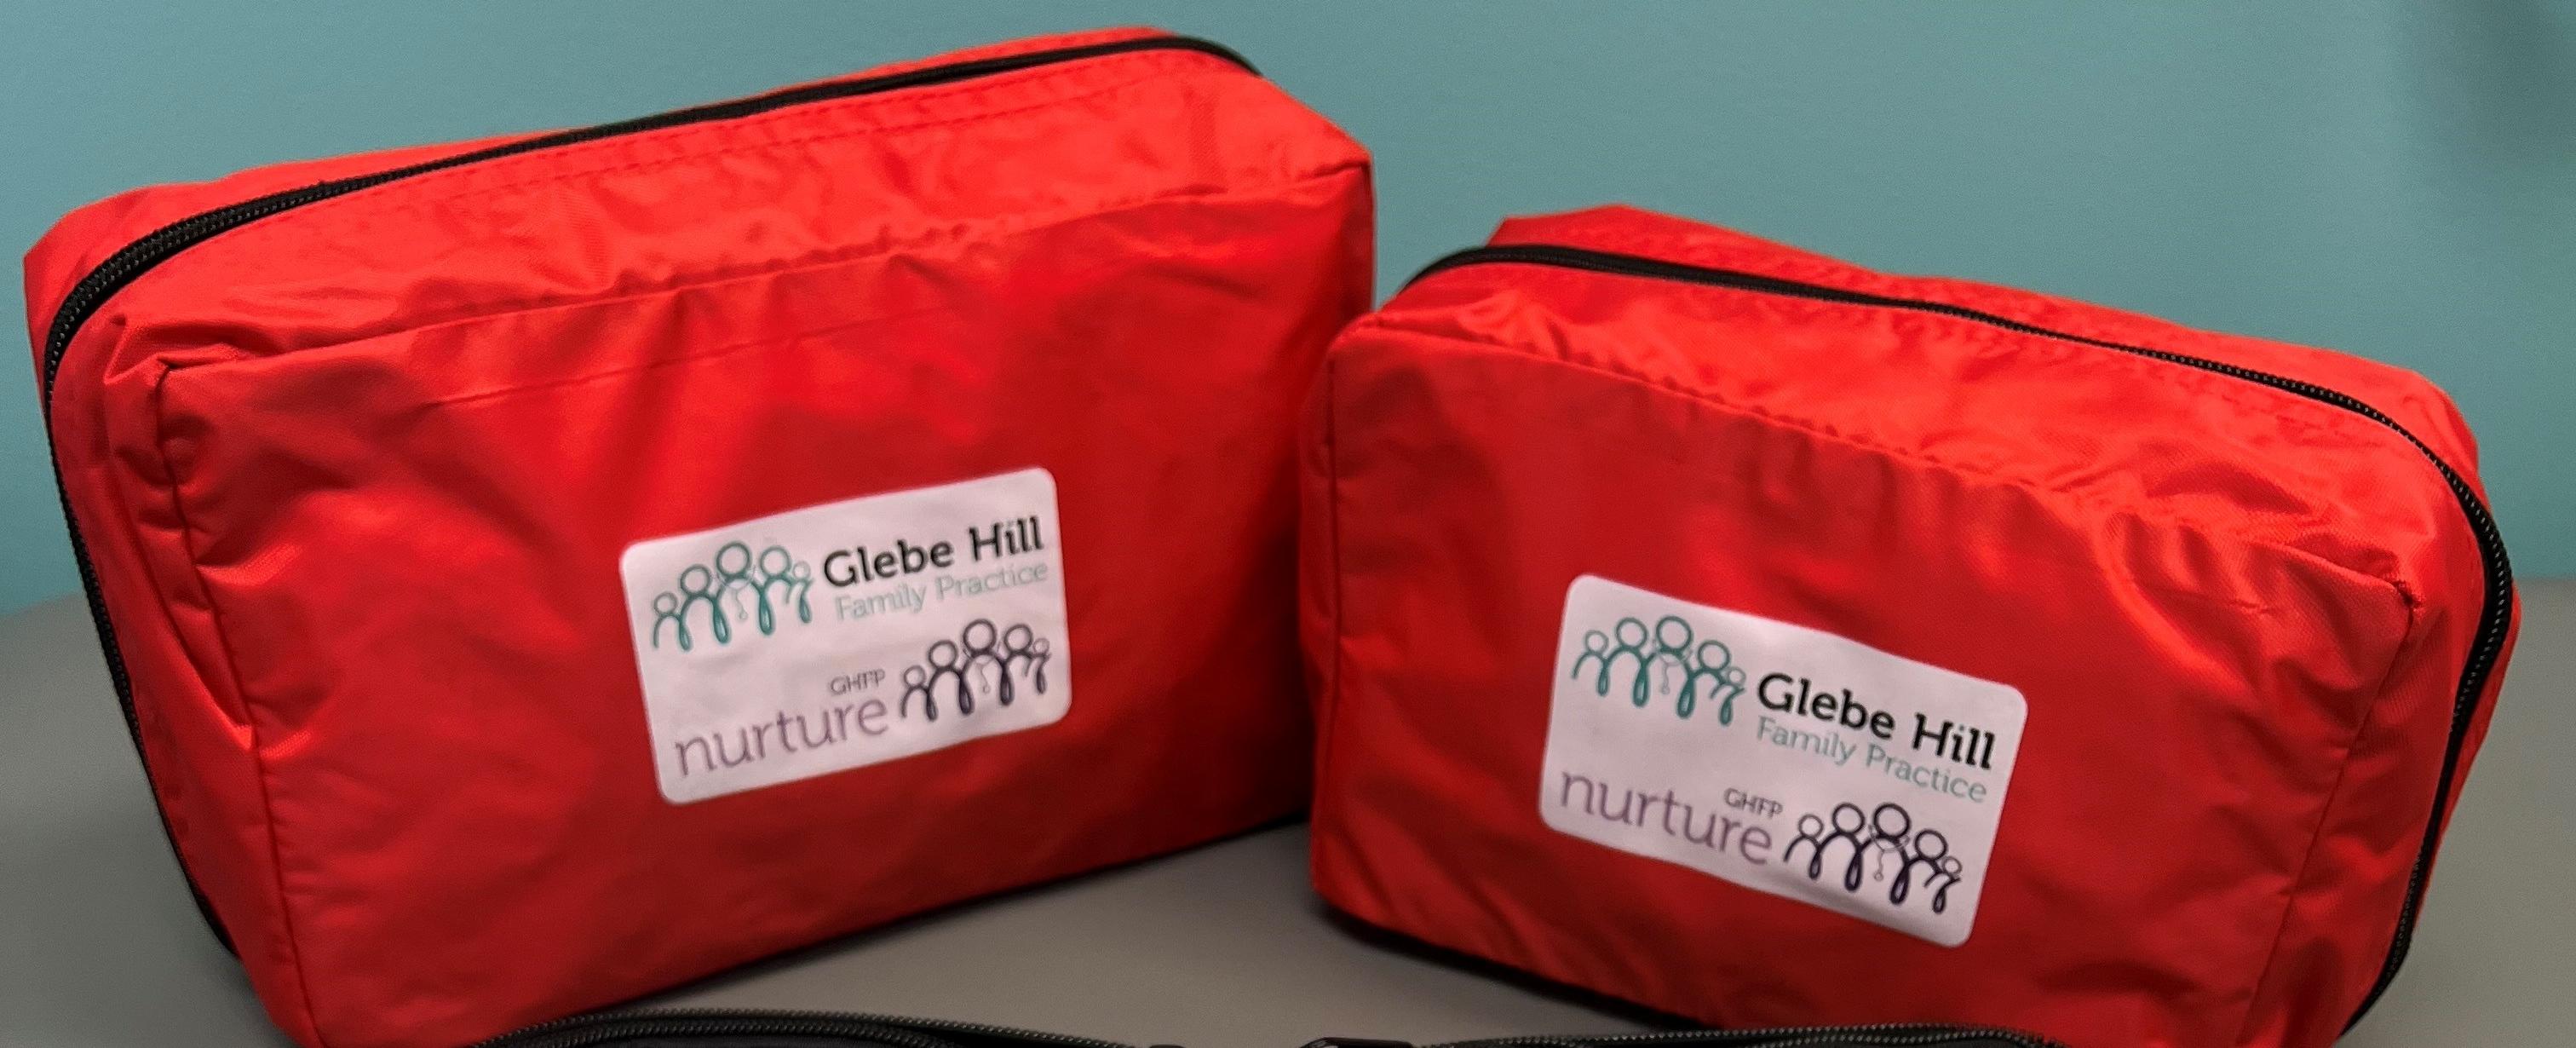 GHFP Nurture Travel Clinic - First Aid Kits